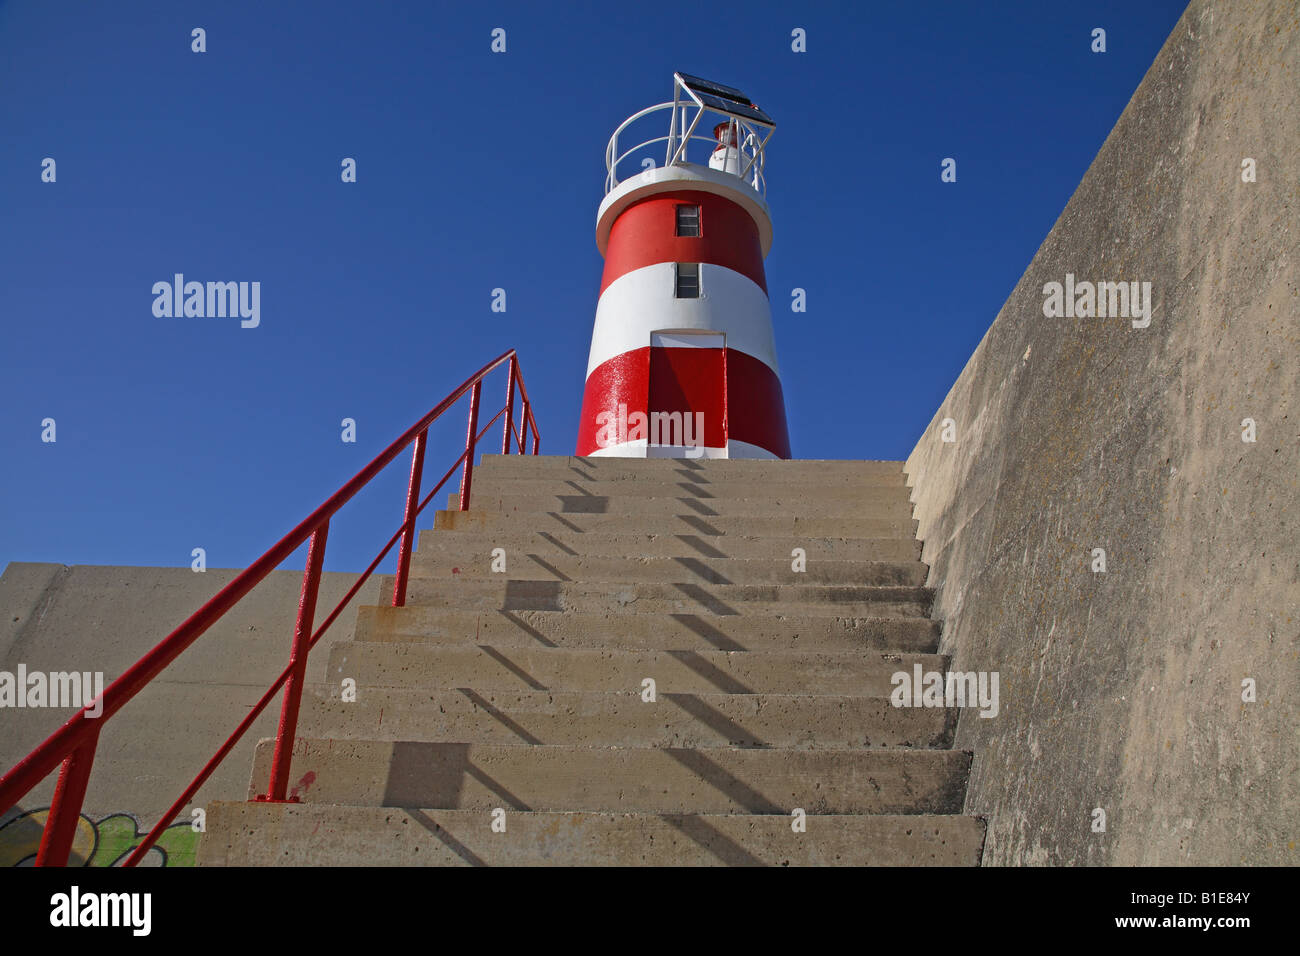 Red and white lighthouse at Baleeira fishing port, Sagres, Portugal Stock Photo